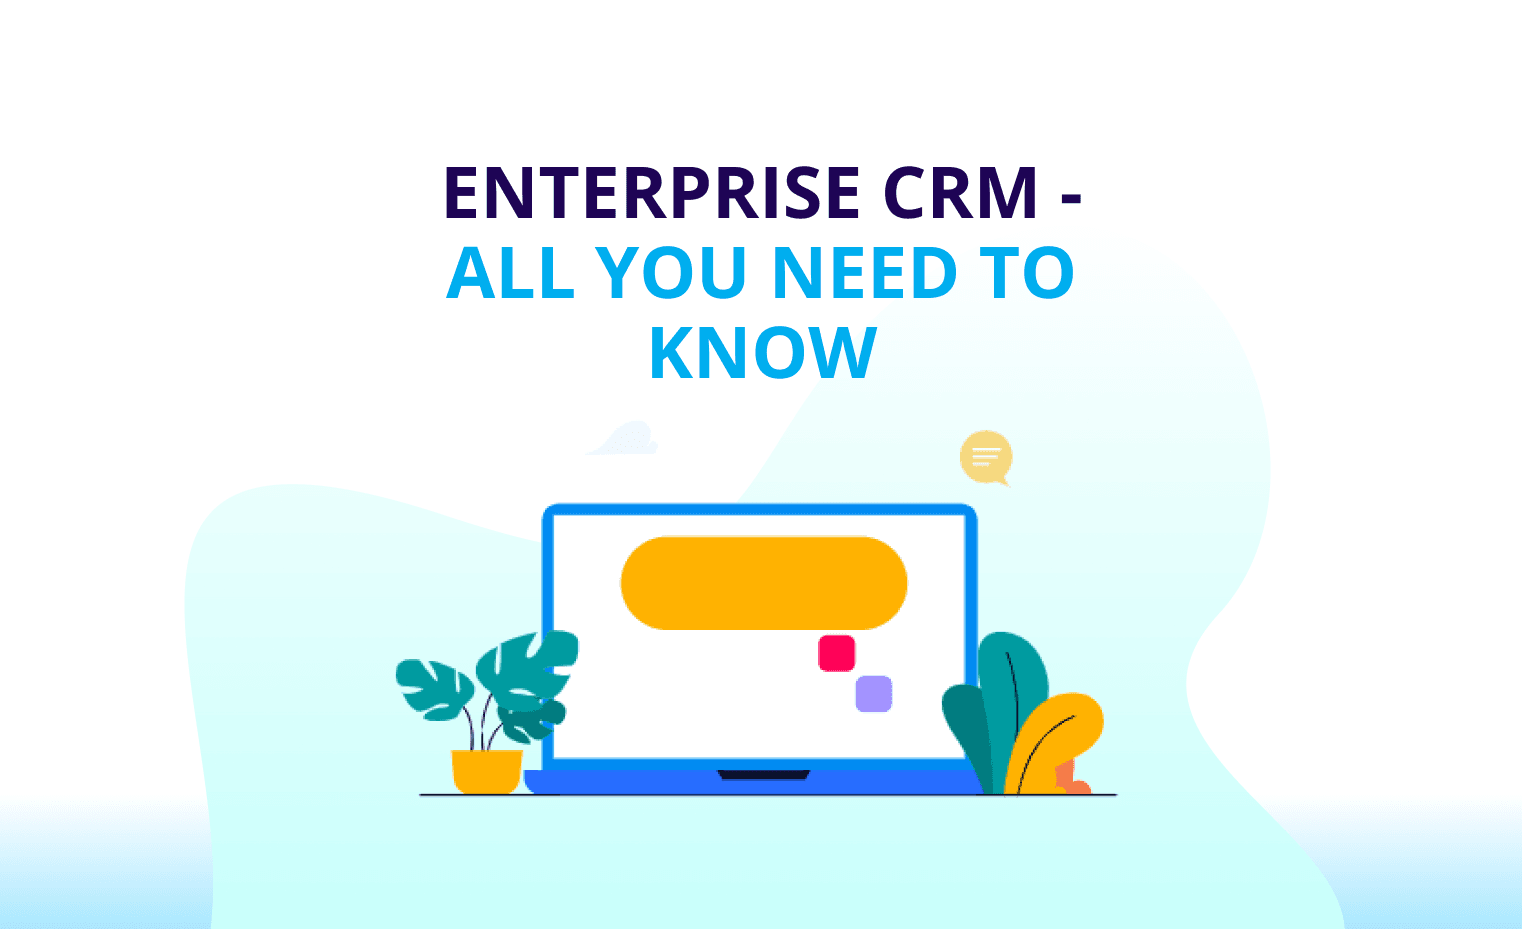 Enterprise CRM - All You Need To Know